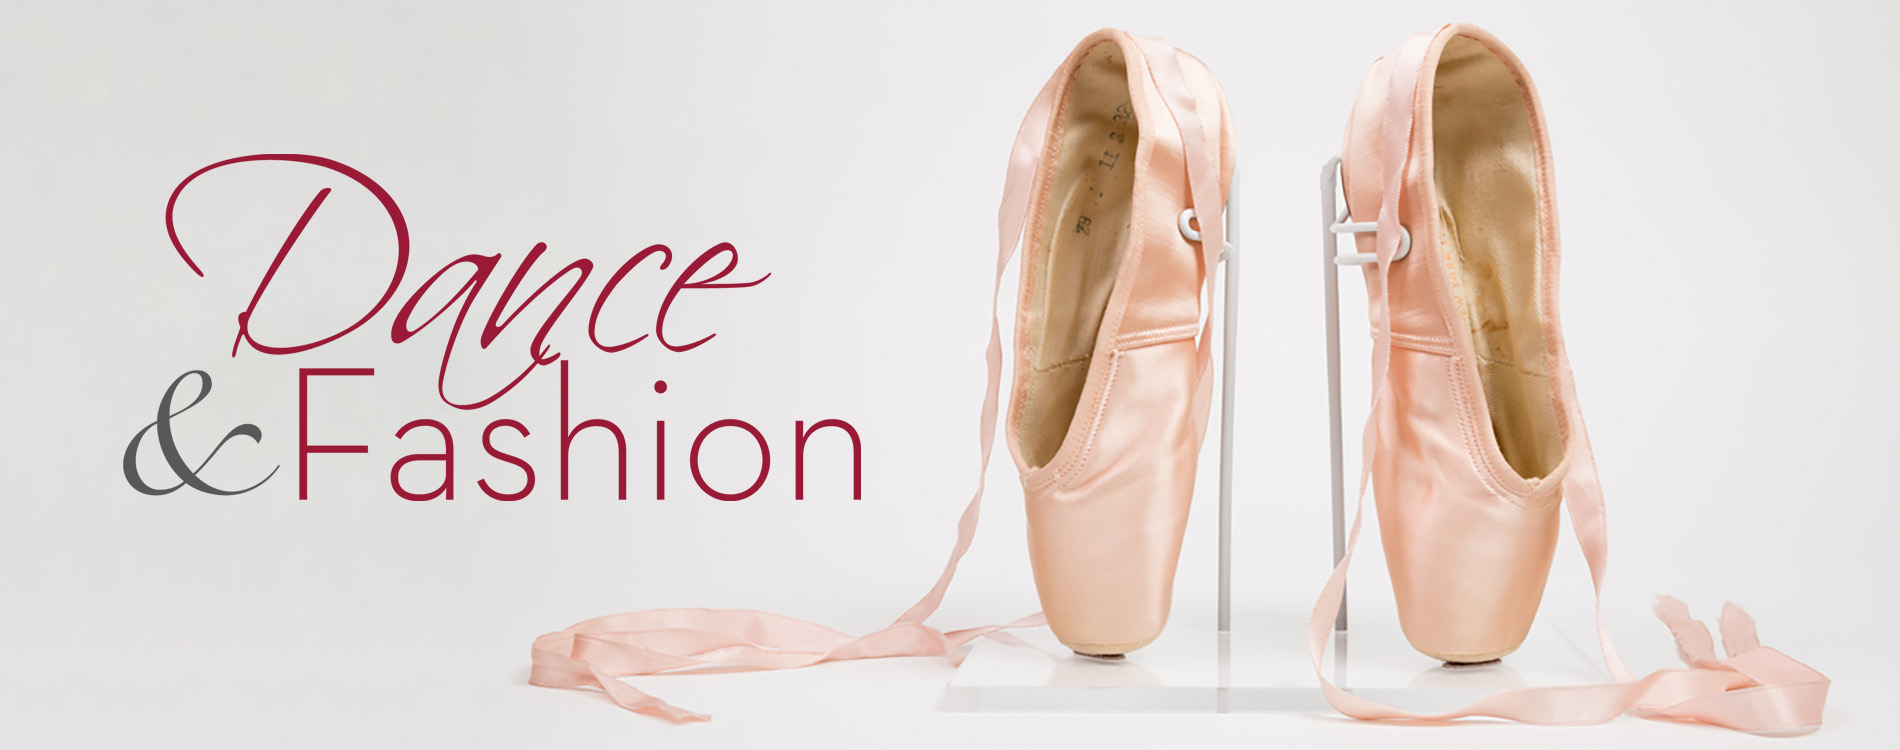 pink ballet shoes with text that reads "Dance + Fashion"